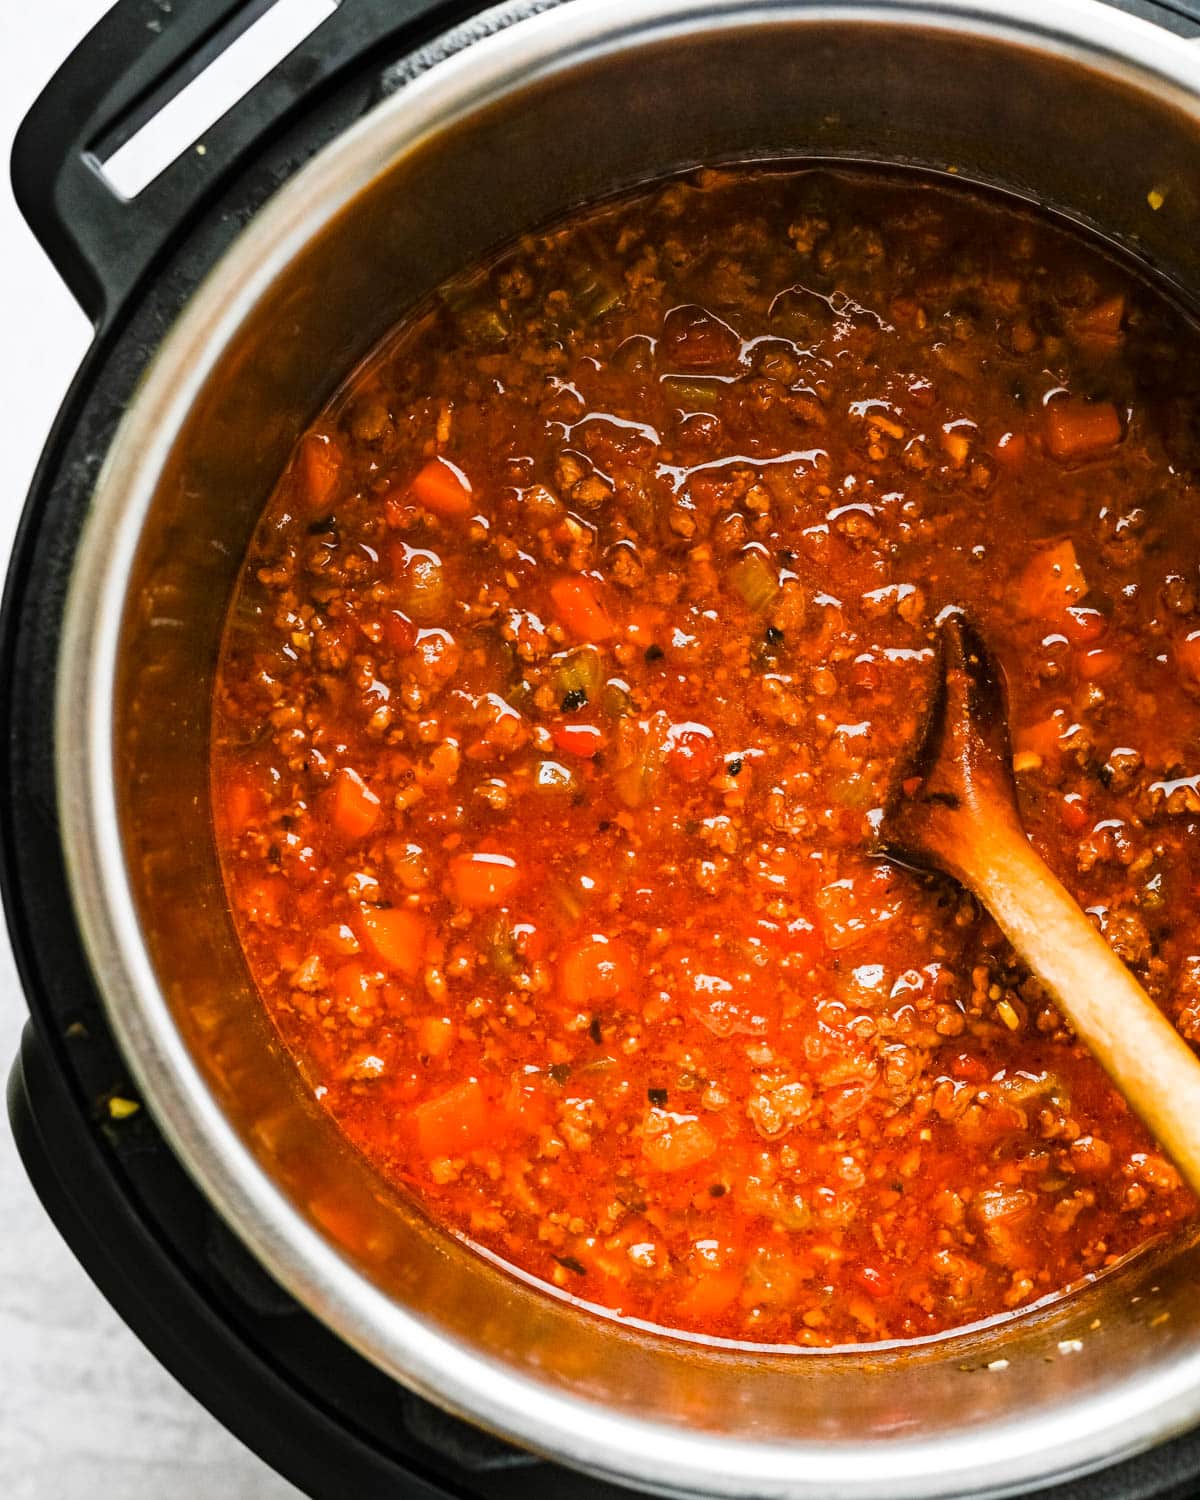 After pressure cooking, the ragu must simmer to evaporate some liquid.